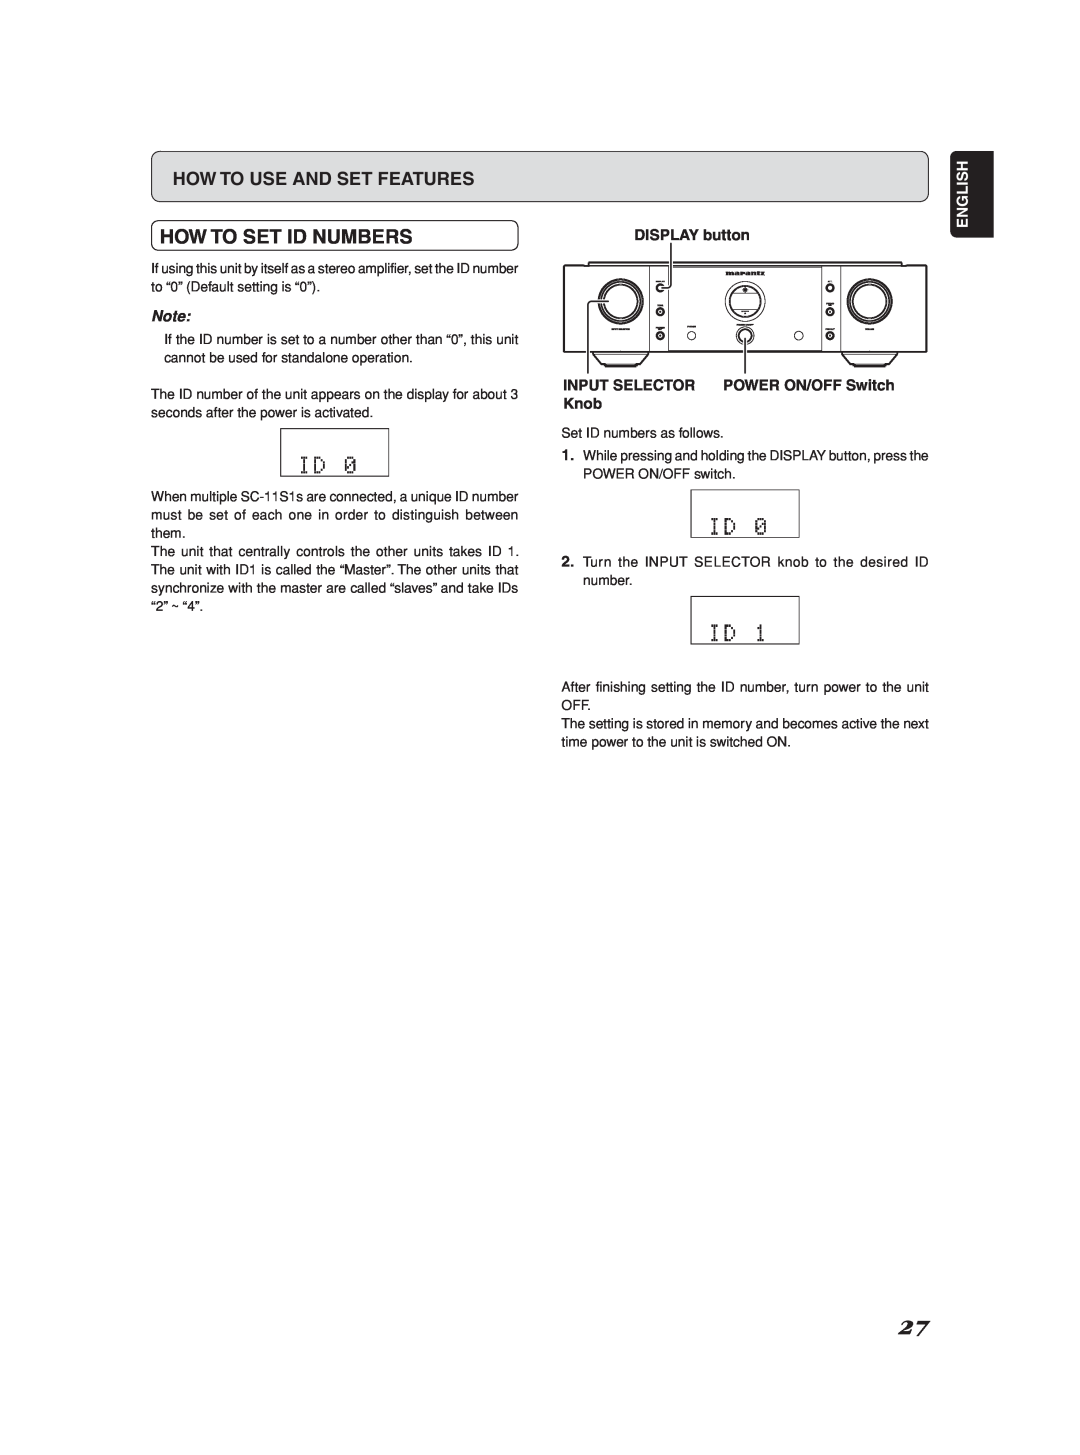 Marantz Model SC-11S1 manual How To Set Id Numbers, English, DISPLAY button, INPUT SELECTOR POWER ON/OFF Switch Knob 